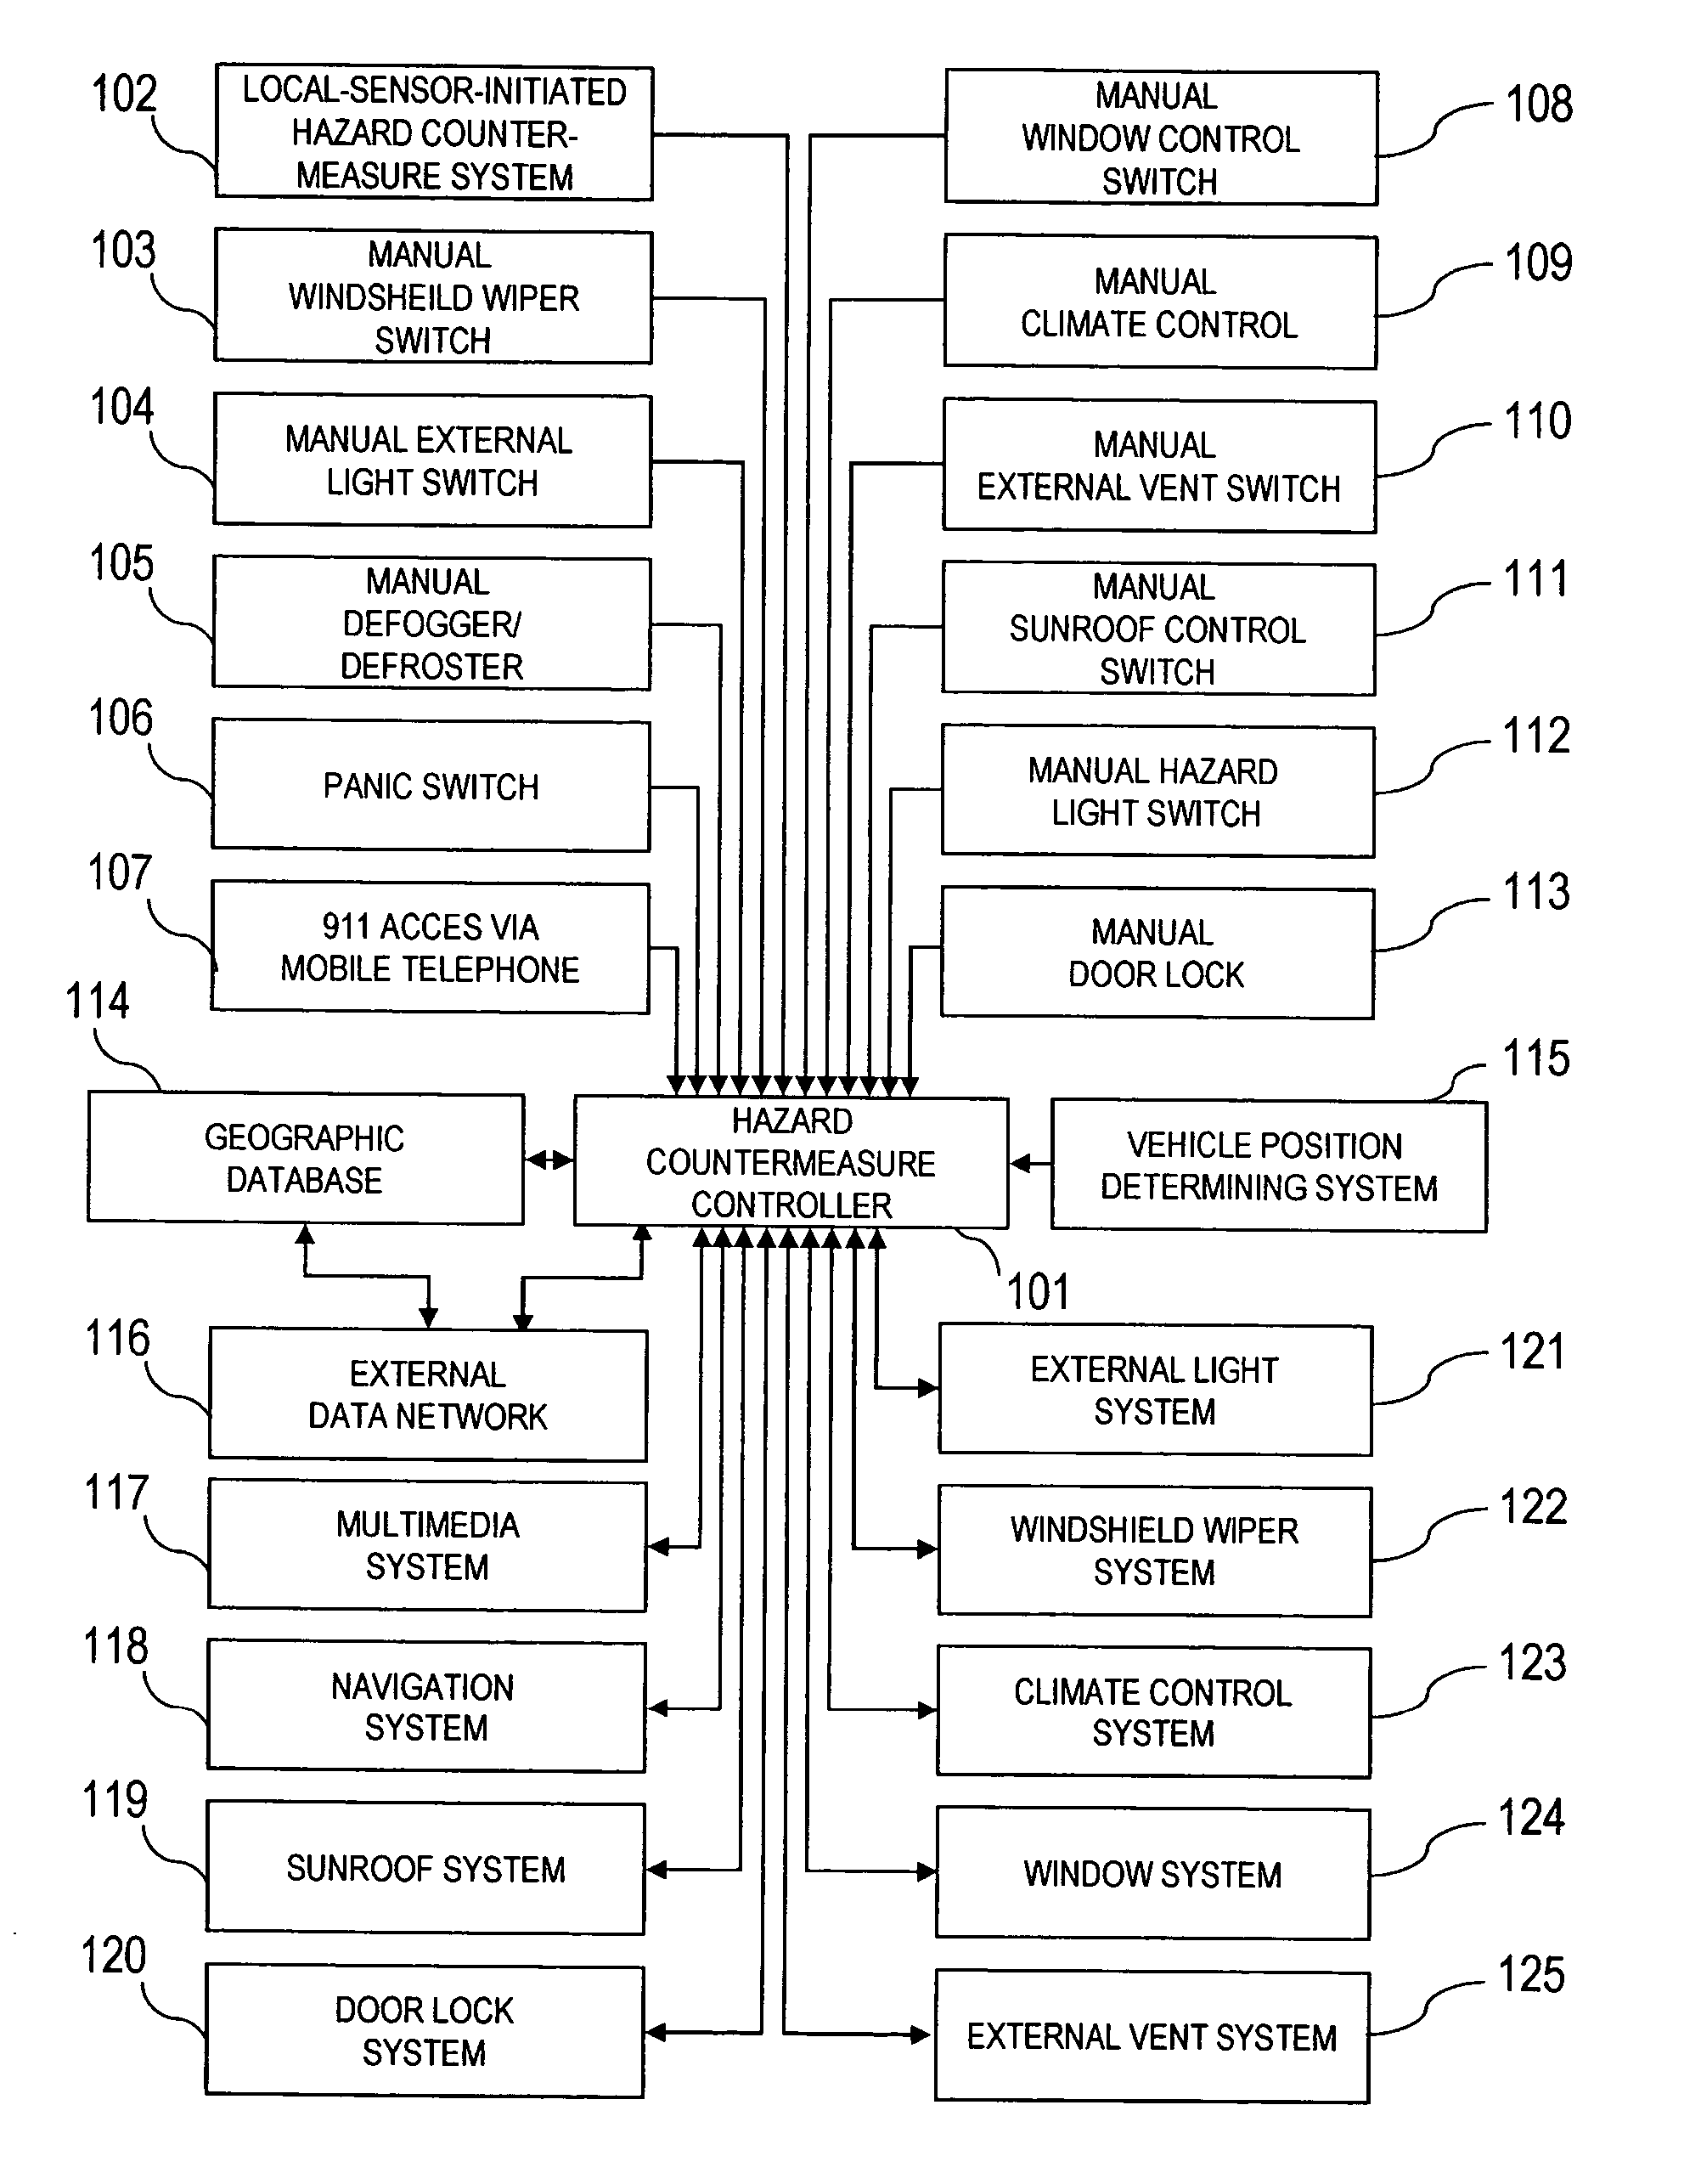 Hazard countermeasure system and method for vehicles